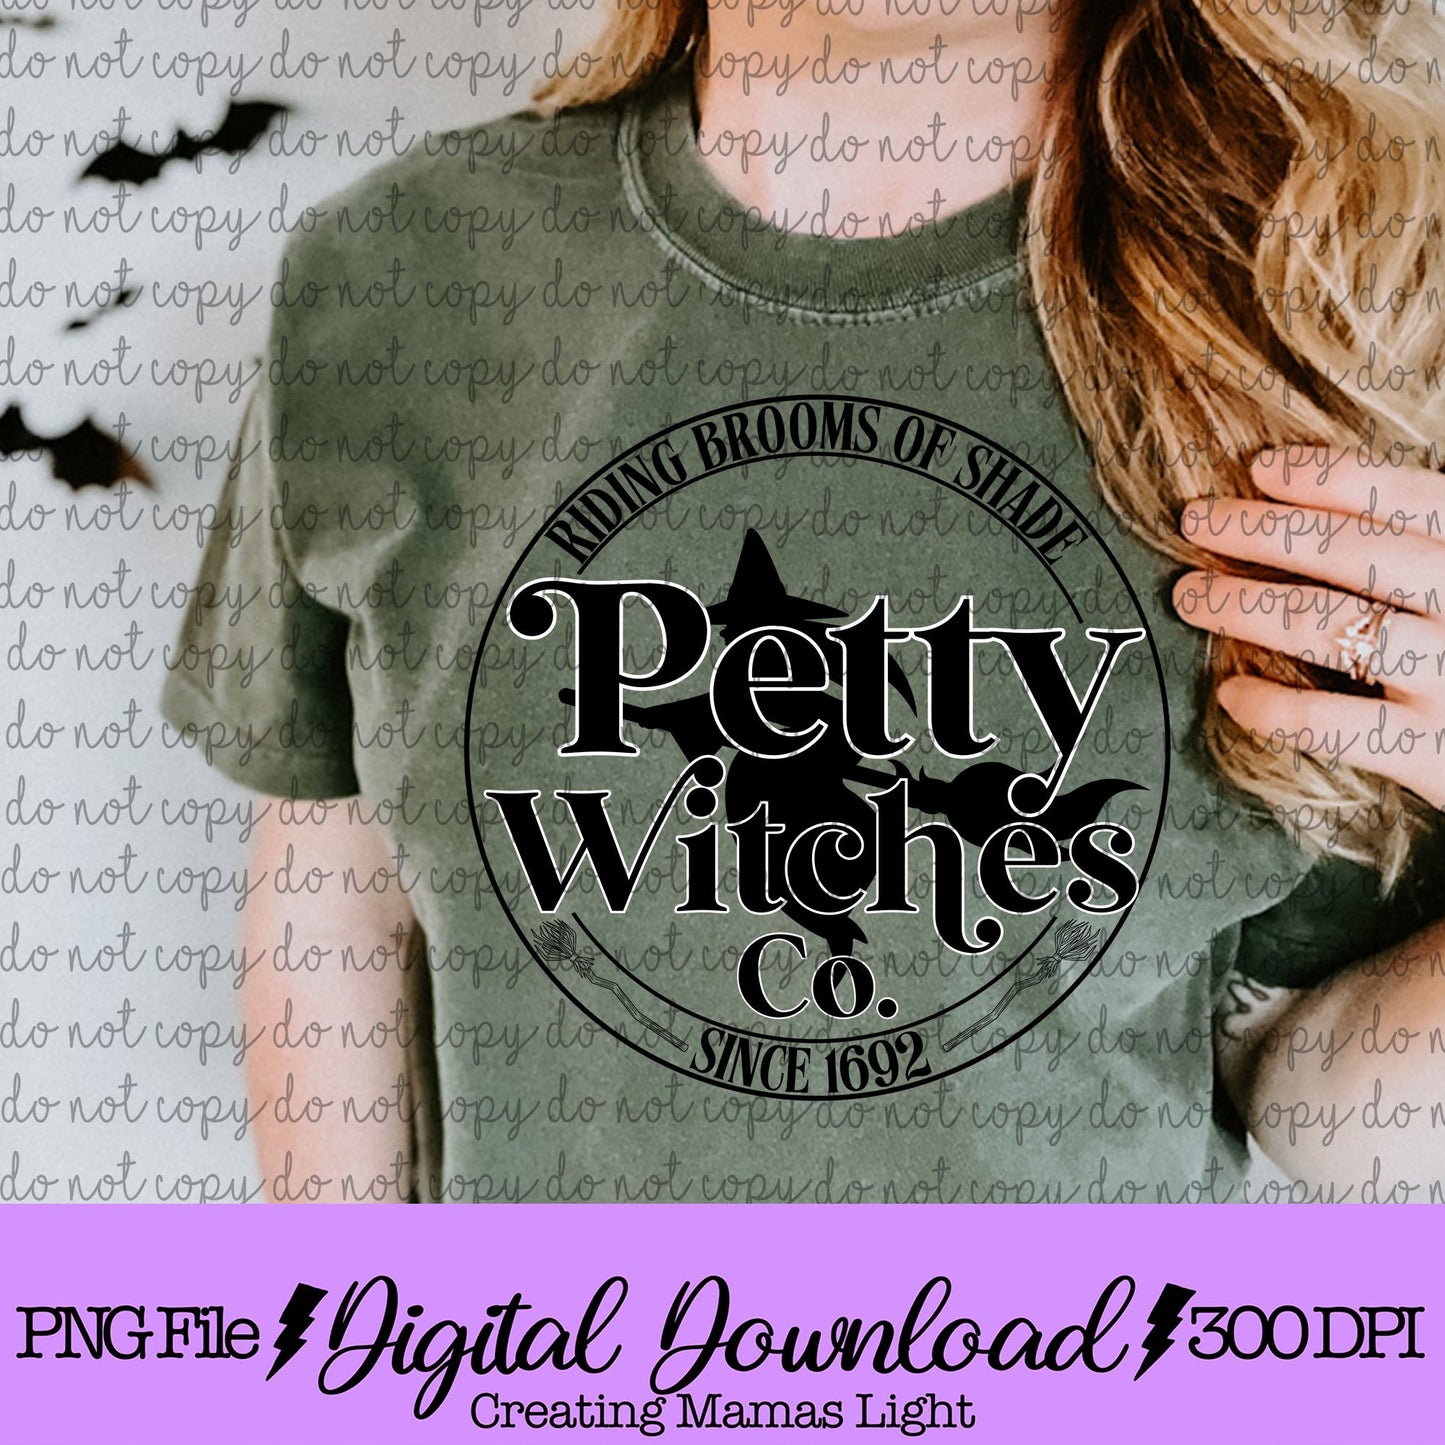 Petty Witches Co